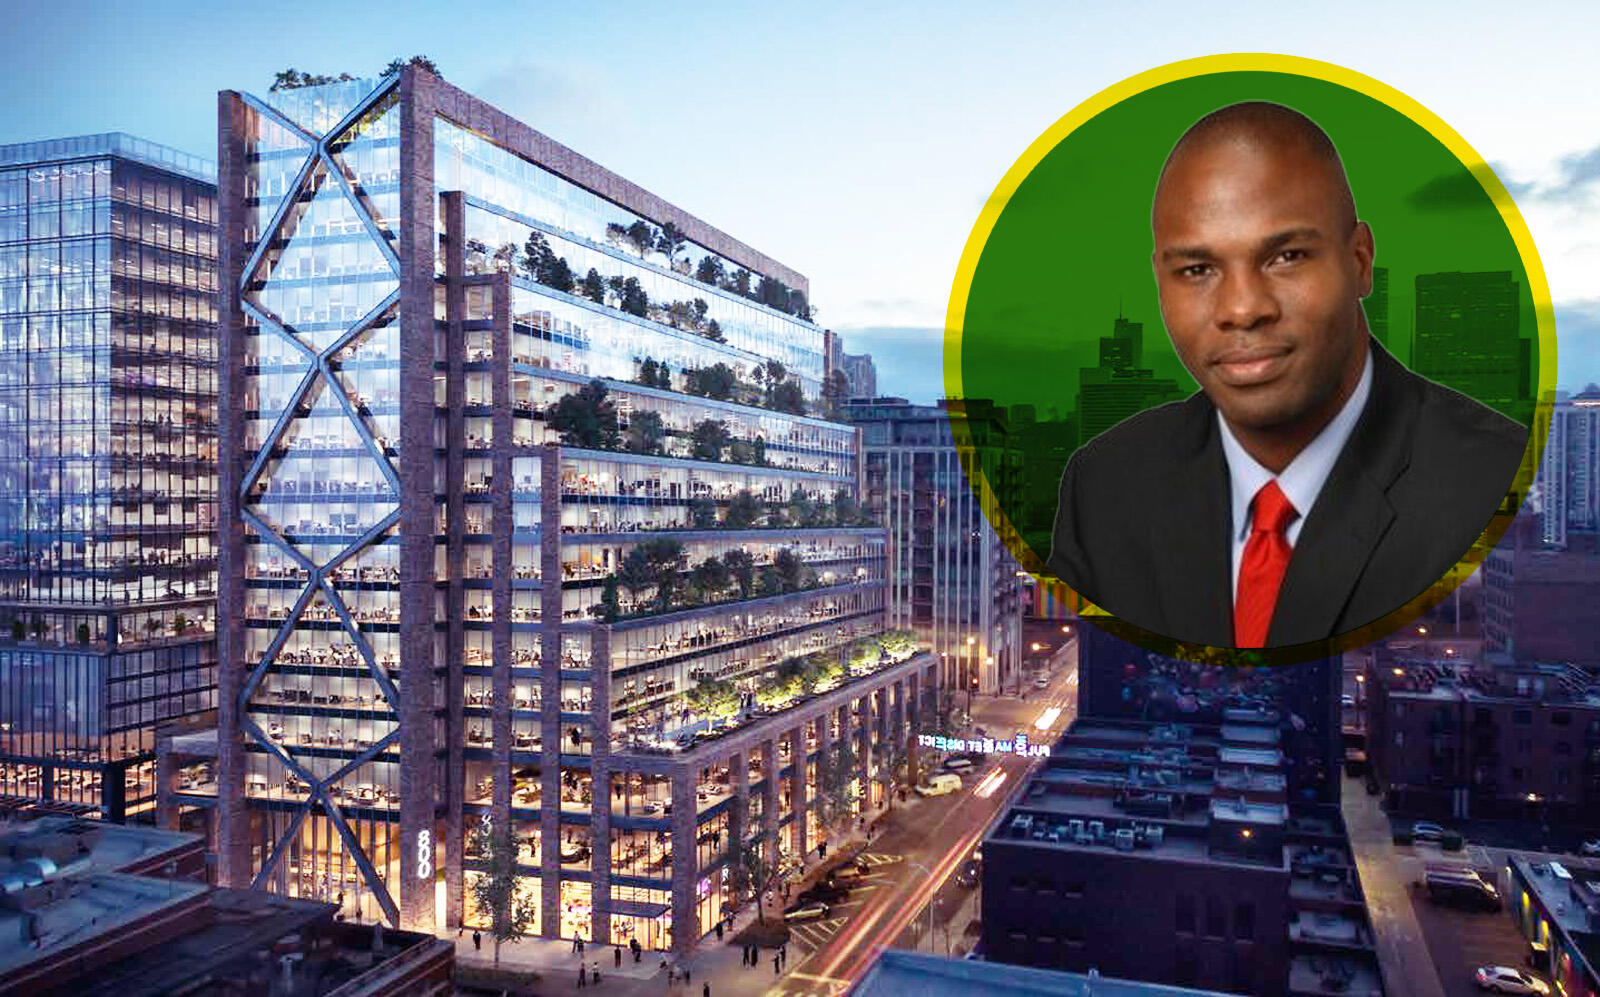 John Deere's Andrez Carberry and 800 West Fulton Market (LinkedIn via Carberry, 800 Fulton Market)